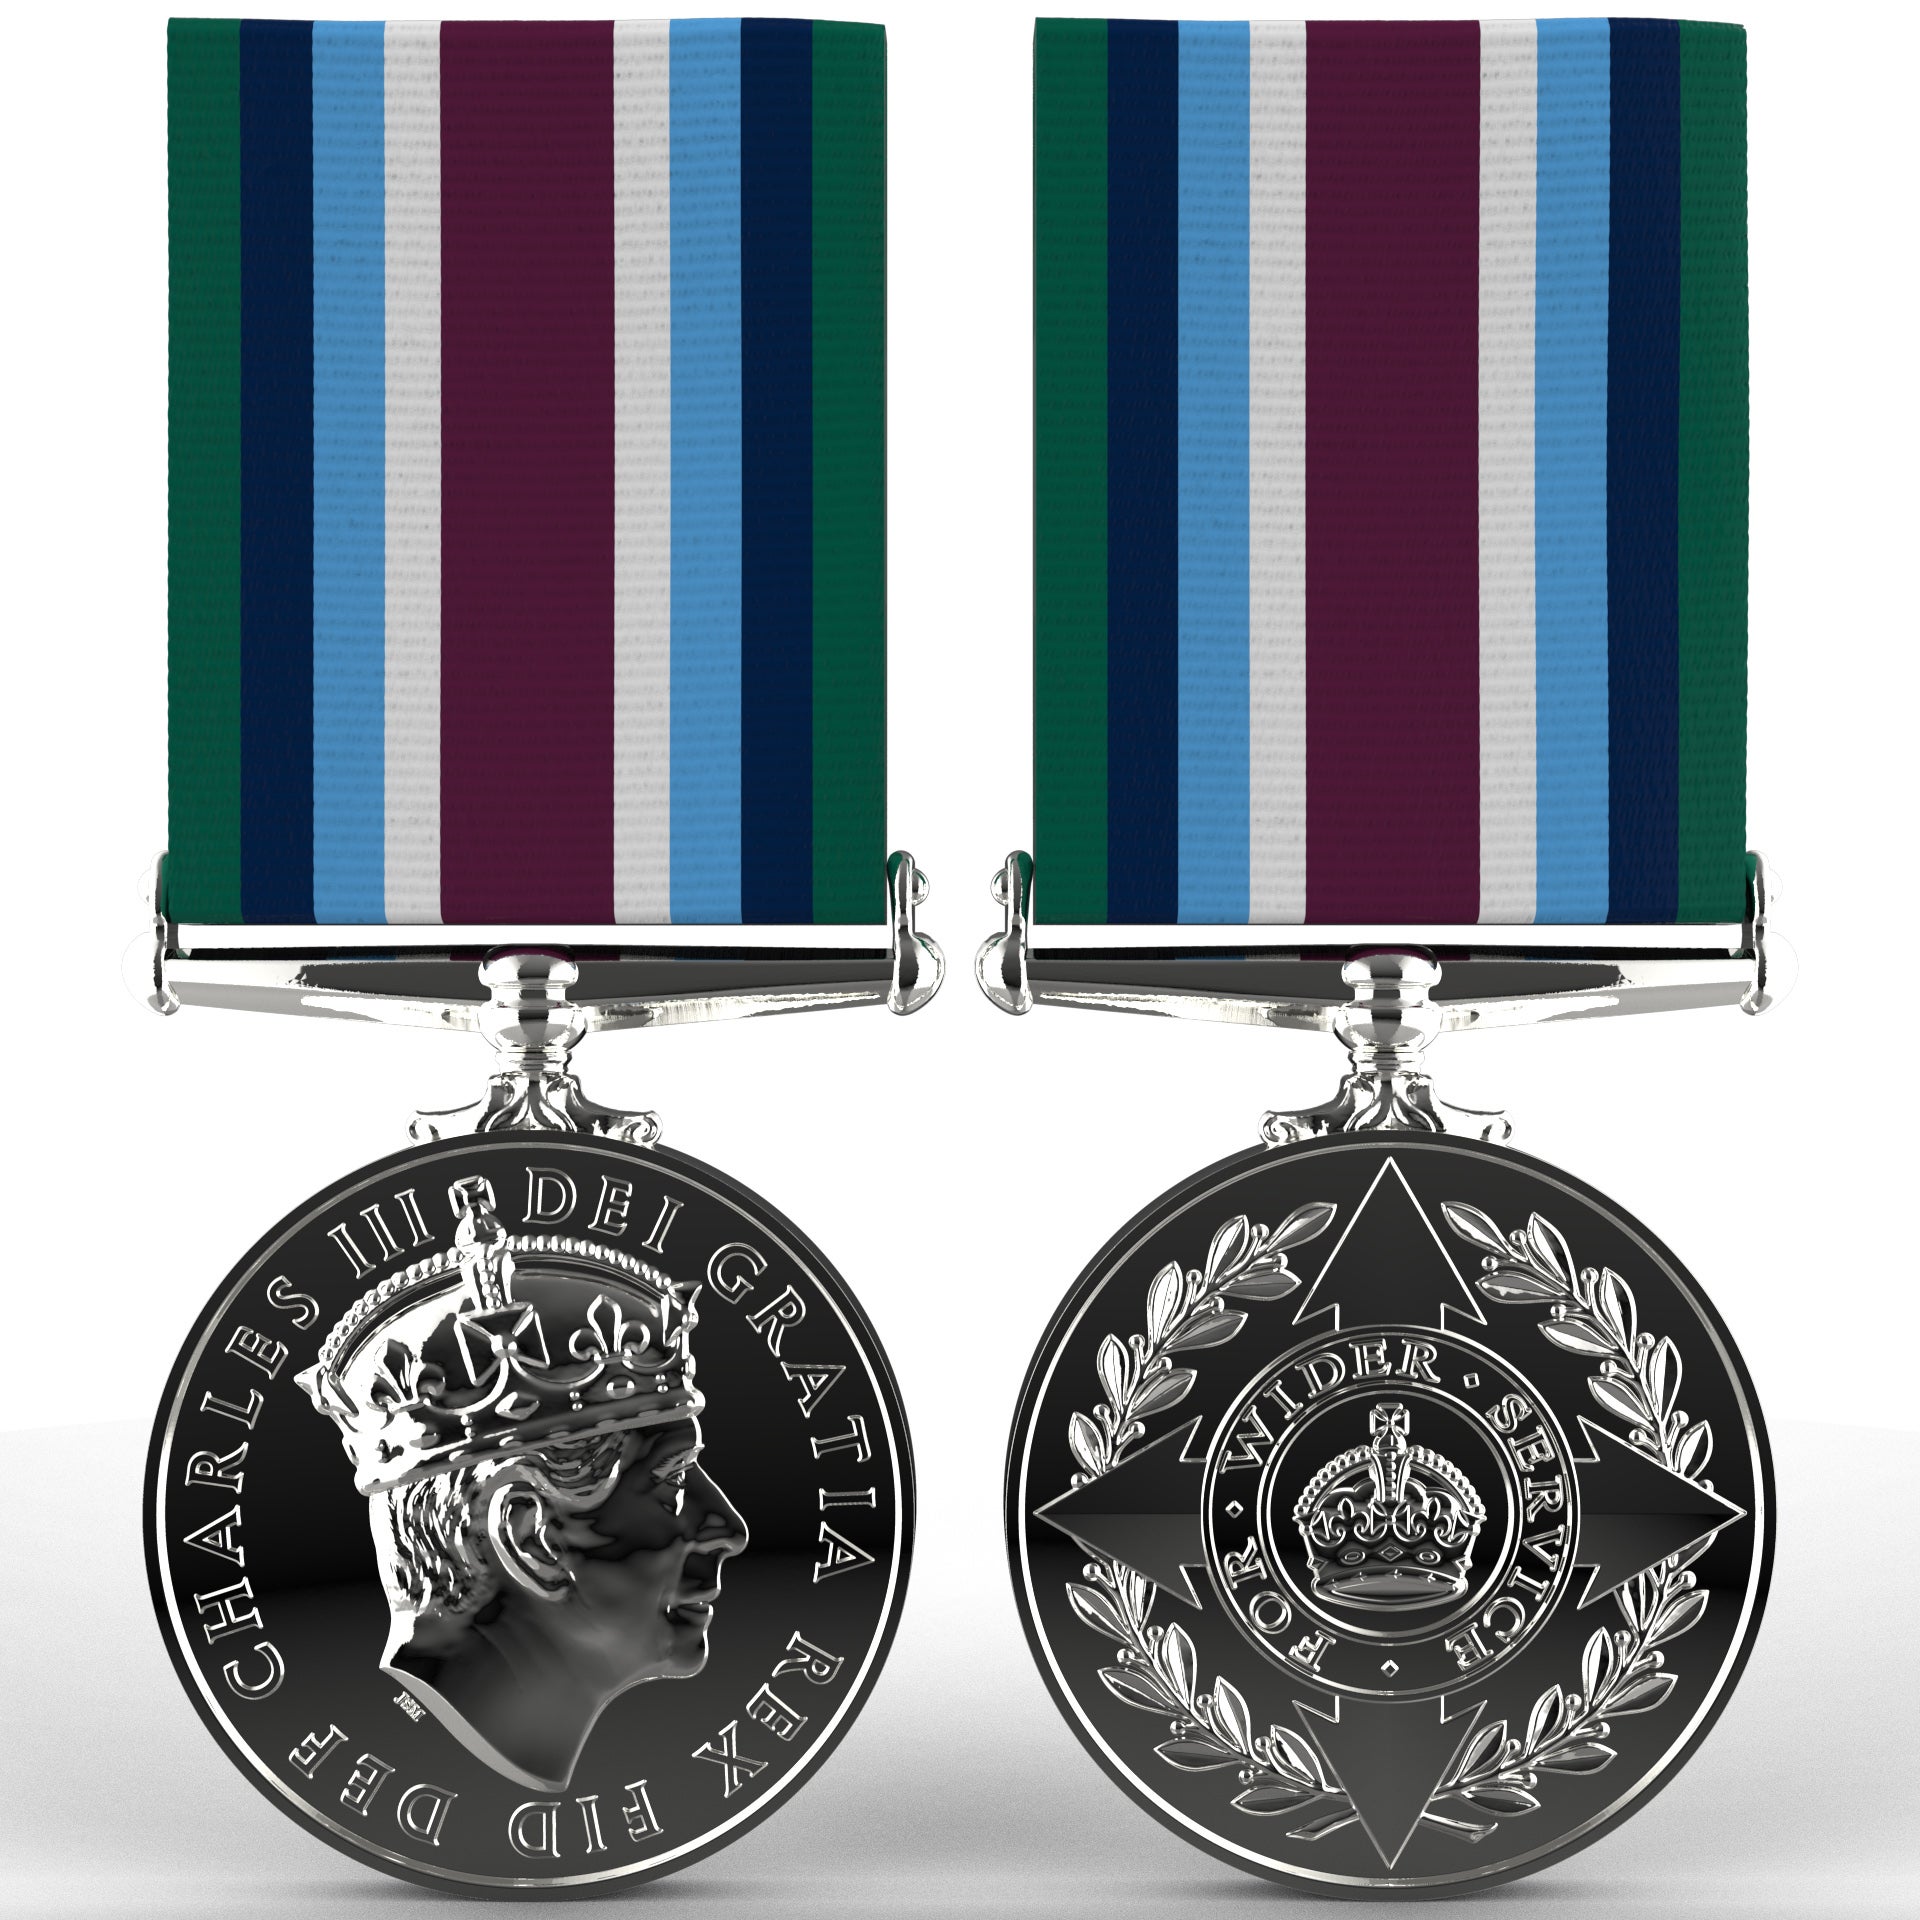 The new Wider Service Medal (WSM), which has been announced by Defence Secretary Grant Shapps